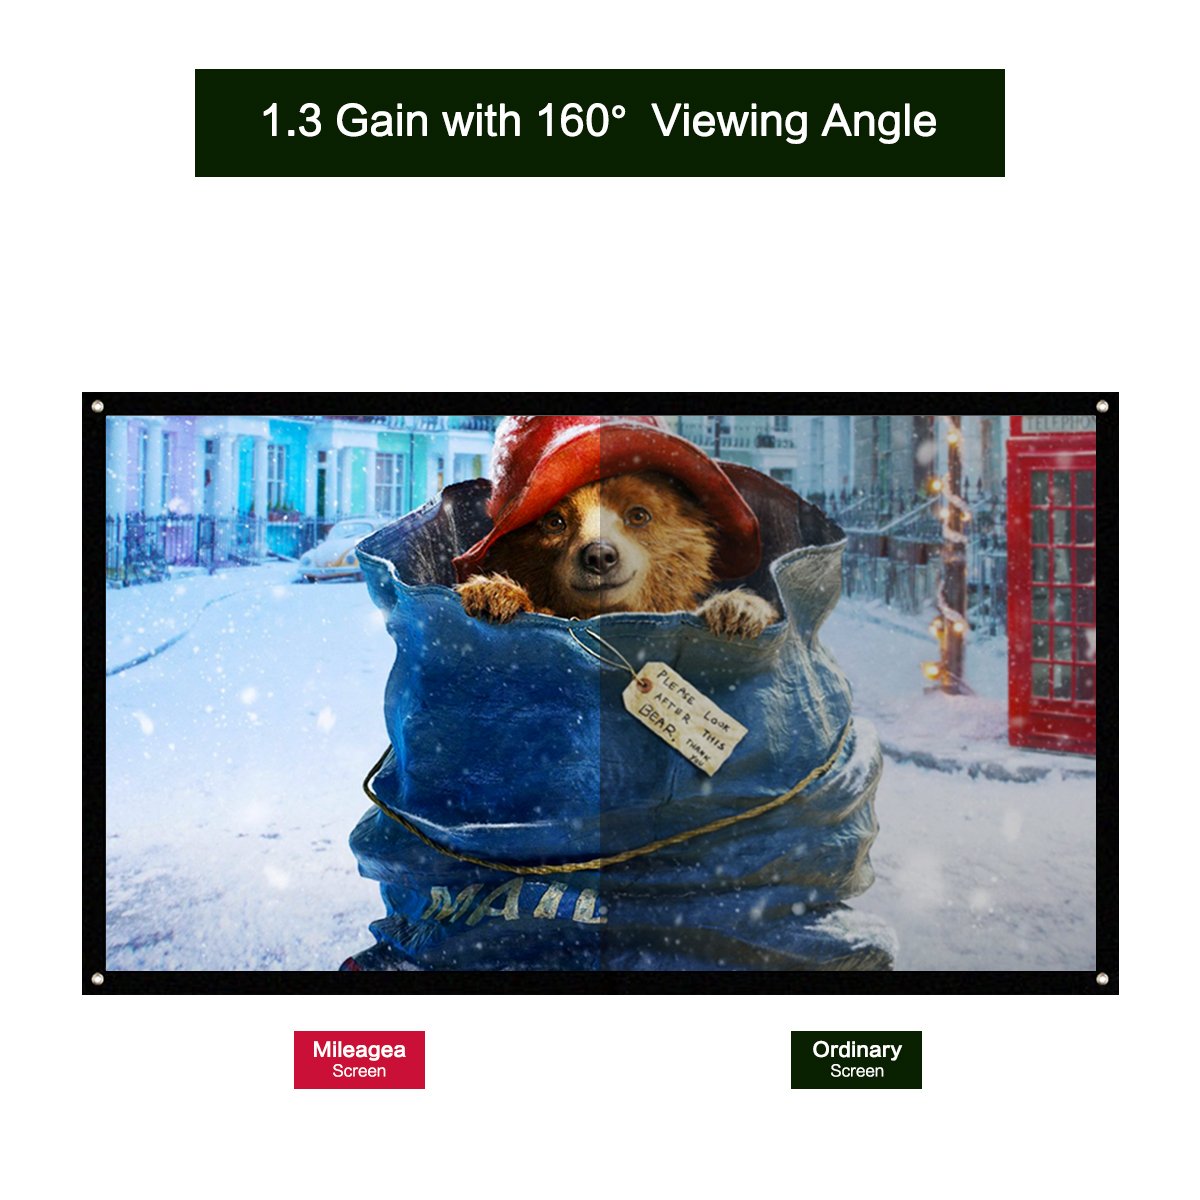 1.3 gain with 160 degree viewing angle